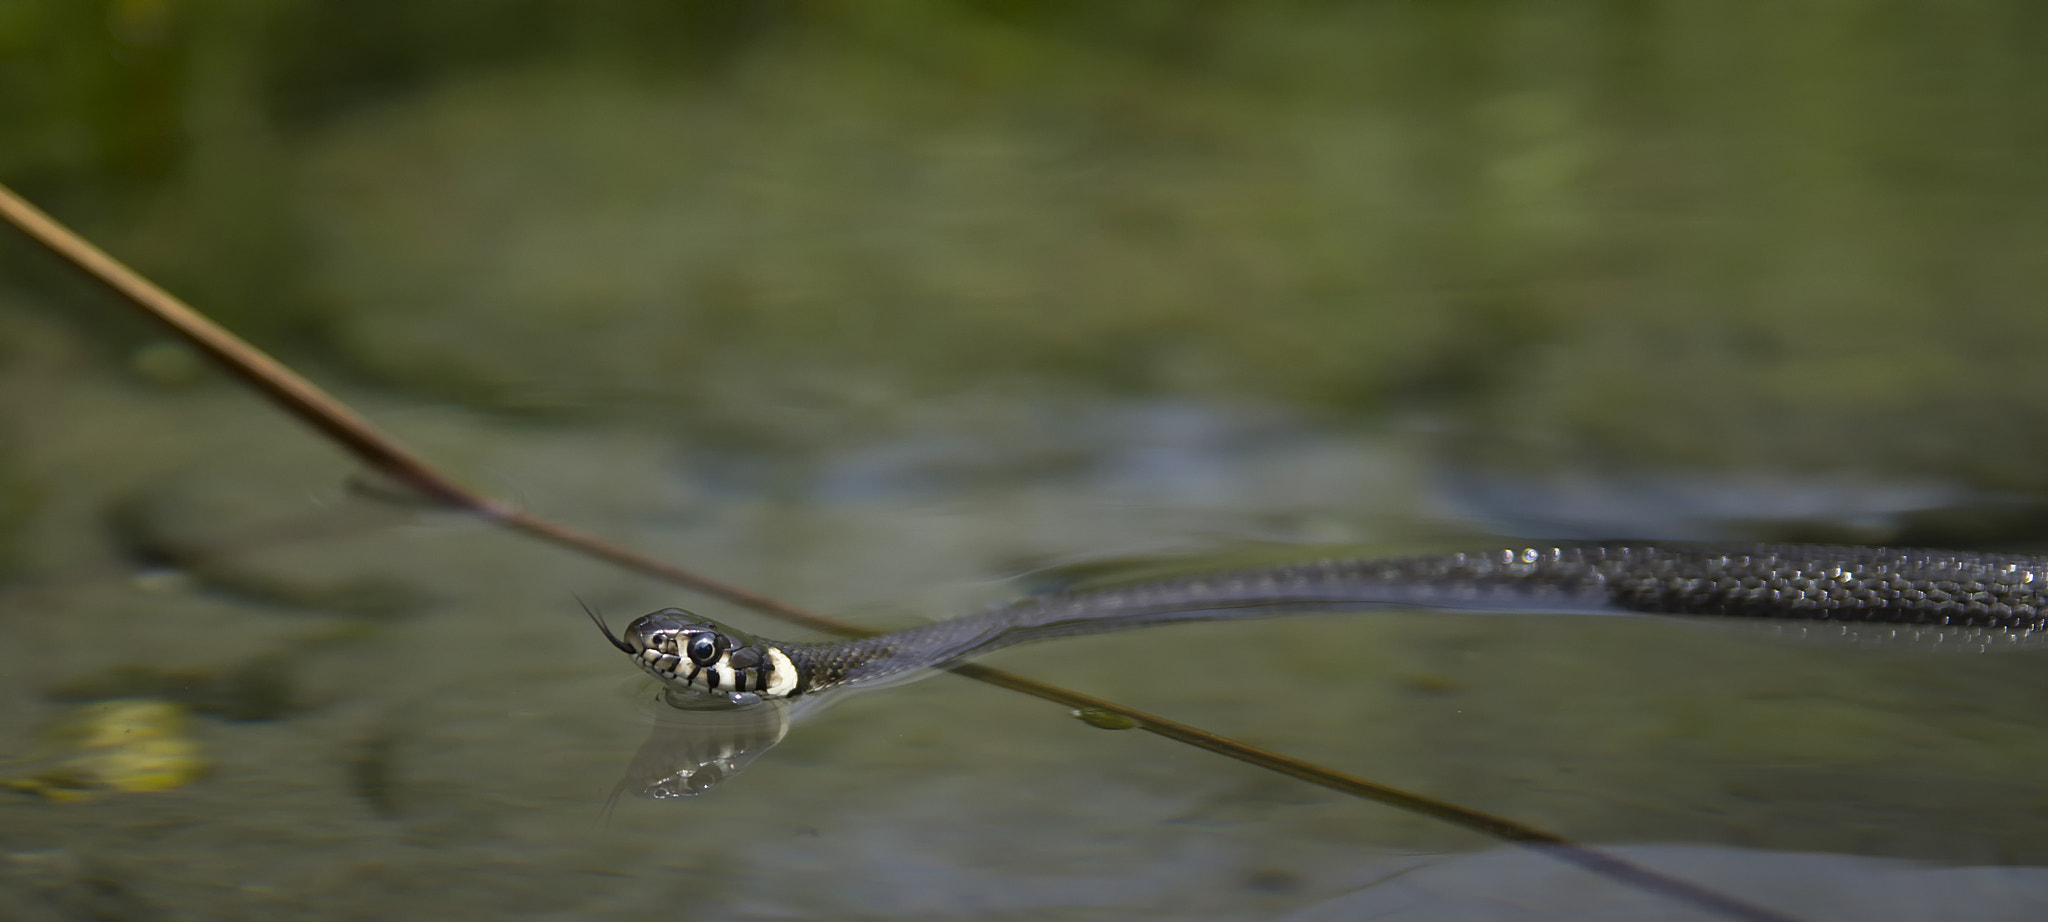 Pentax K-500 sample photo. Swimming with snakes photography